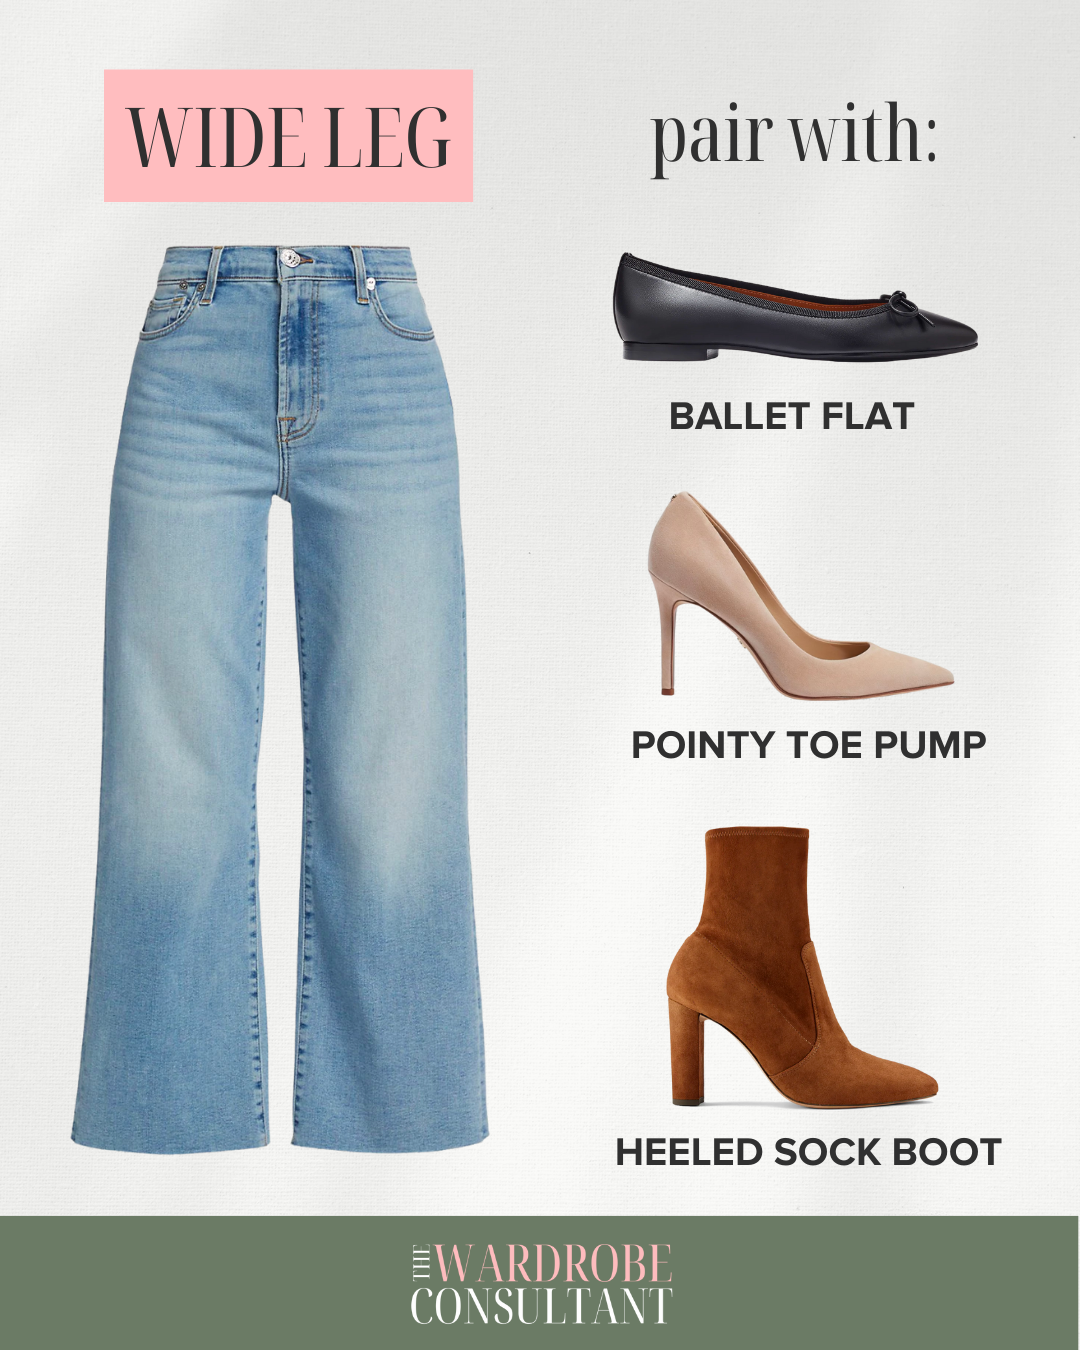 The Ultimate Guide To Matching Your Shoes To Your Jeans — The